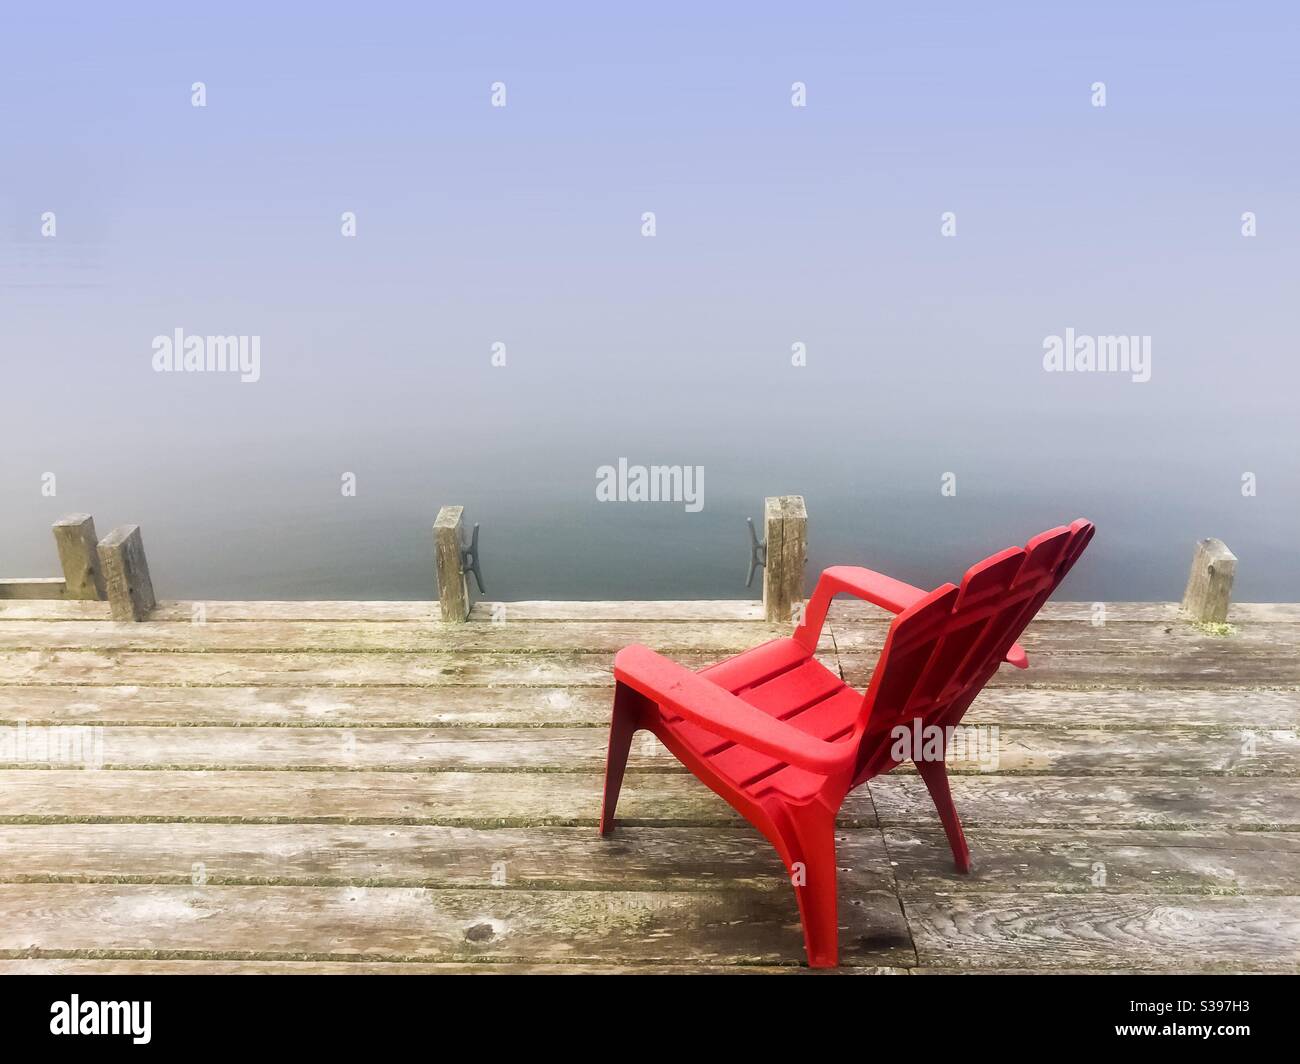 One Chair on a dock in the mist overlooking the water, Nova Scotia, Canada. Room for type. Conceptual image showing solitude, power of one, hot seat, fog approaching. Stock Photo